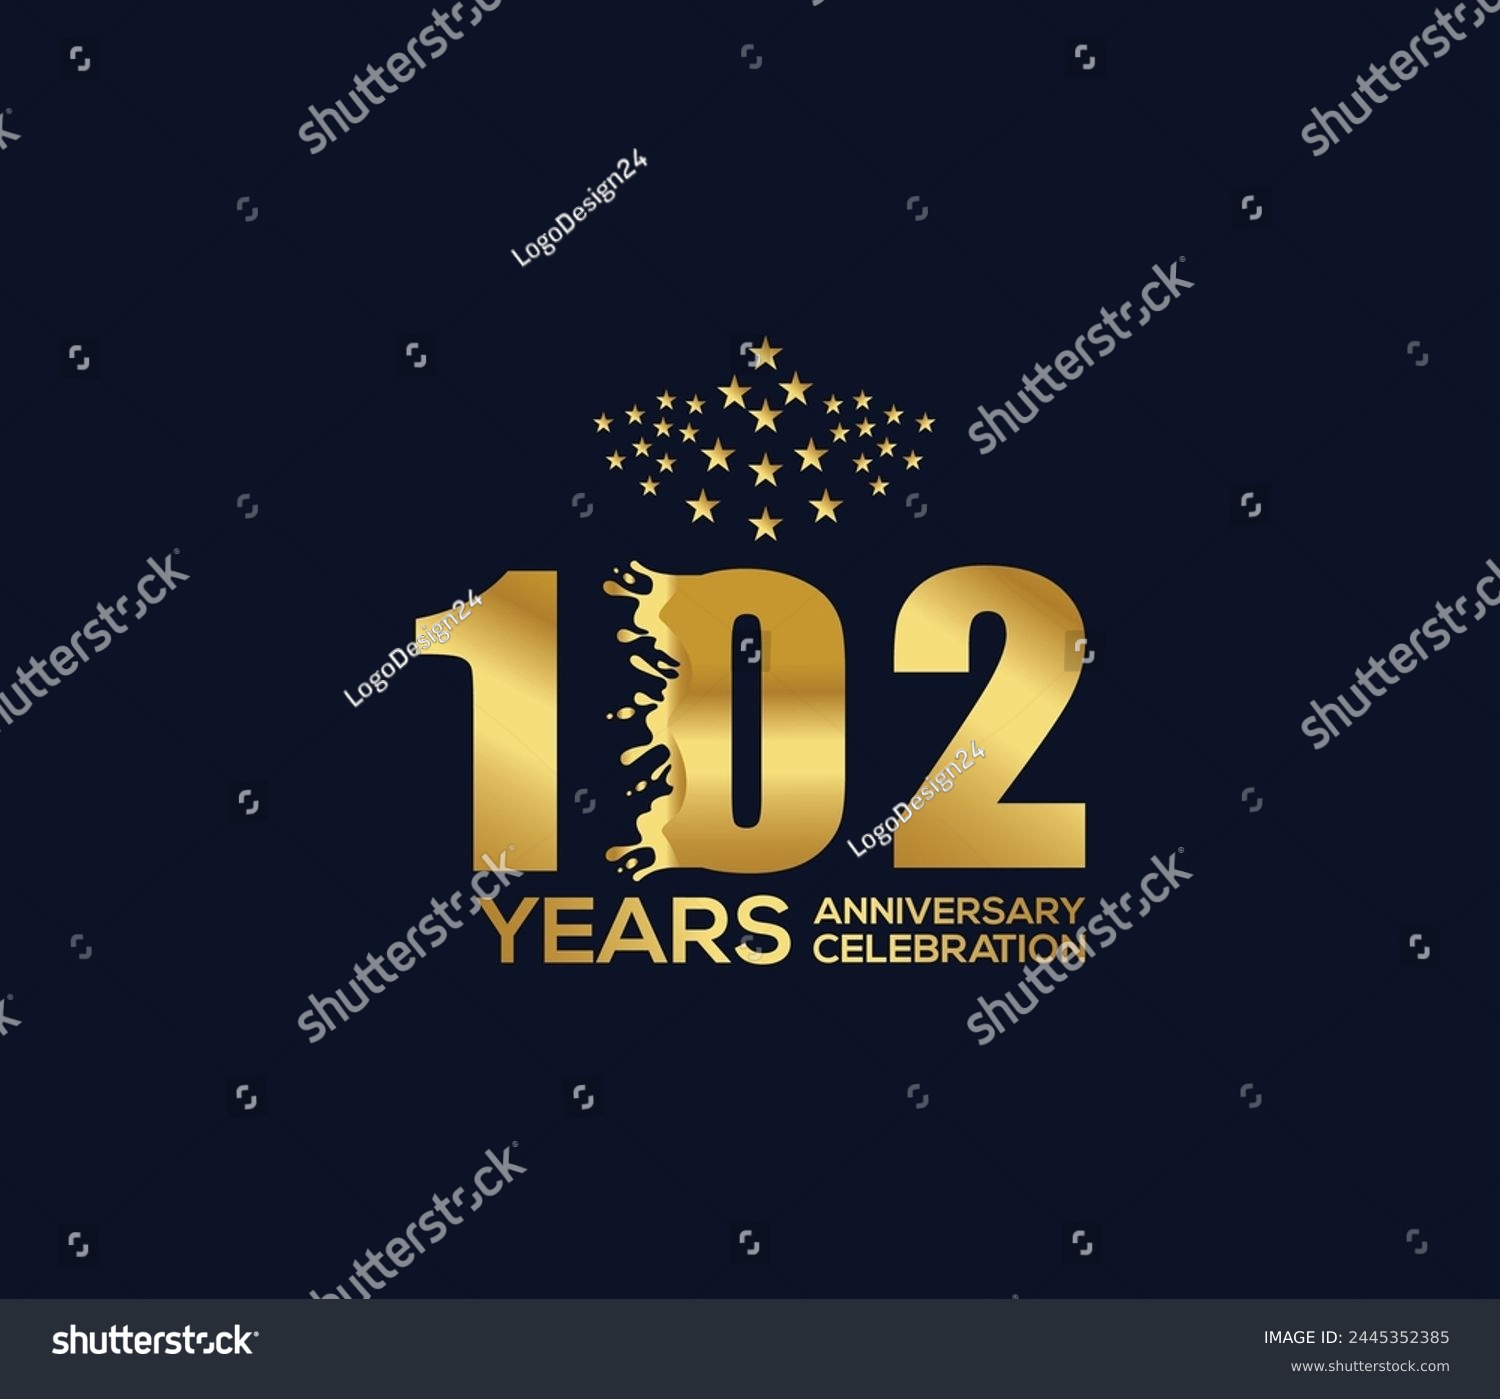 SVG of Celebration of Festivals Days 102 Year Anniversary, Invitations, Party Events, Company Based, Banners, Posters, Card Material, Gold Colors Design svg